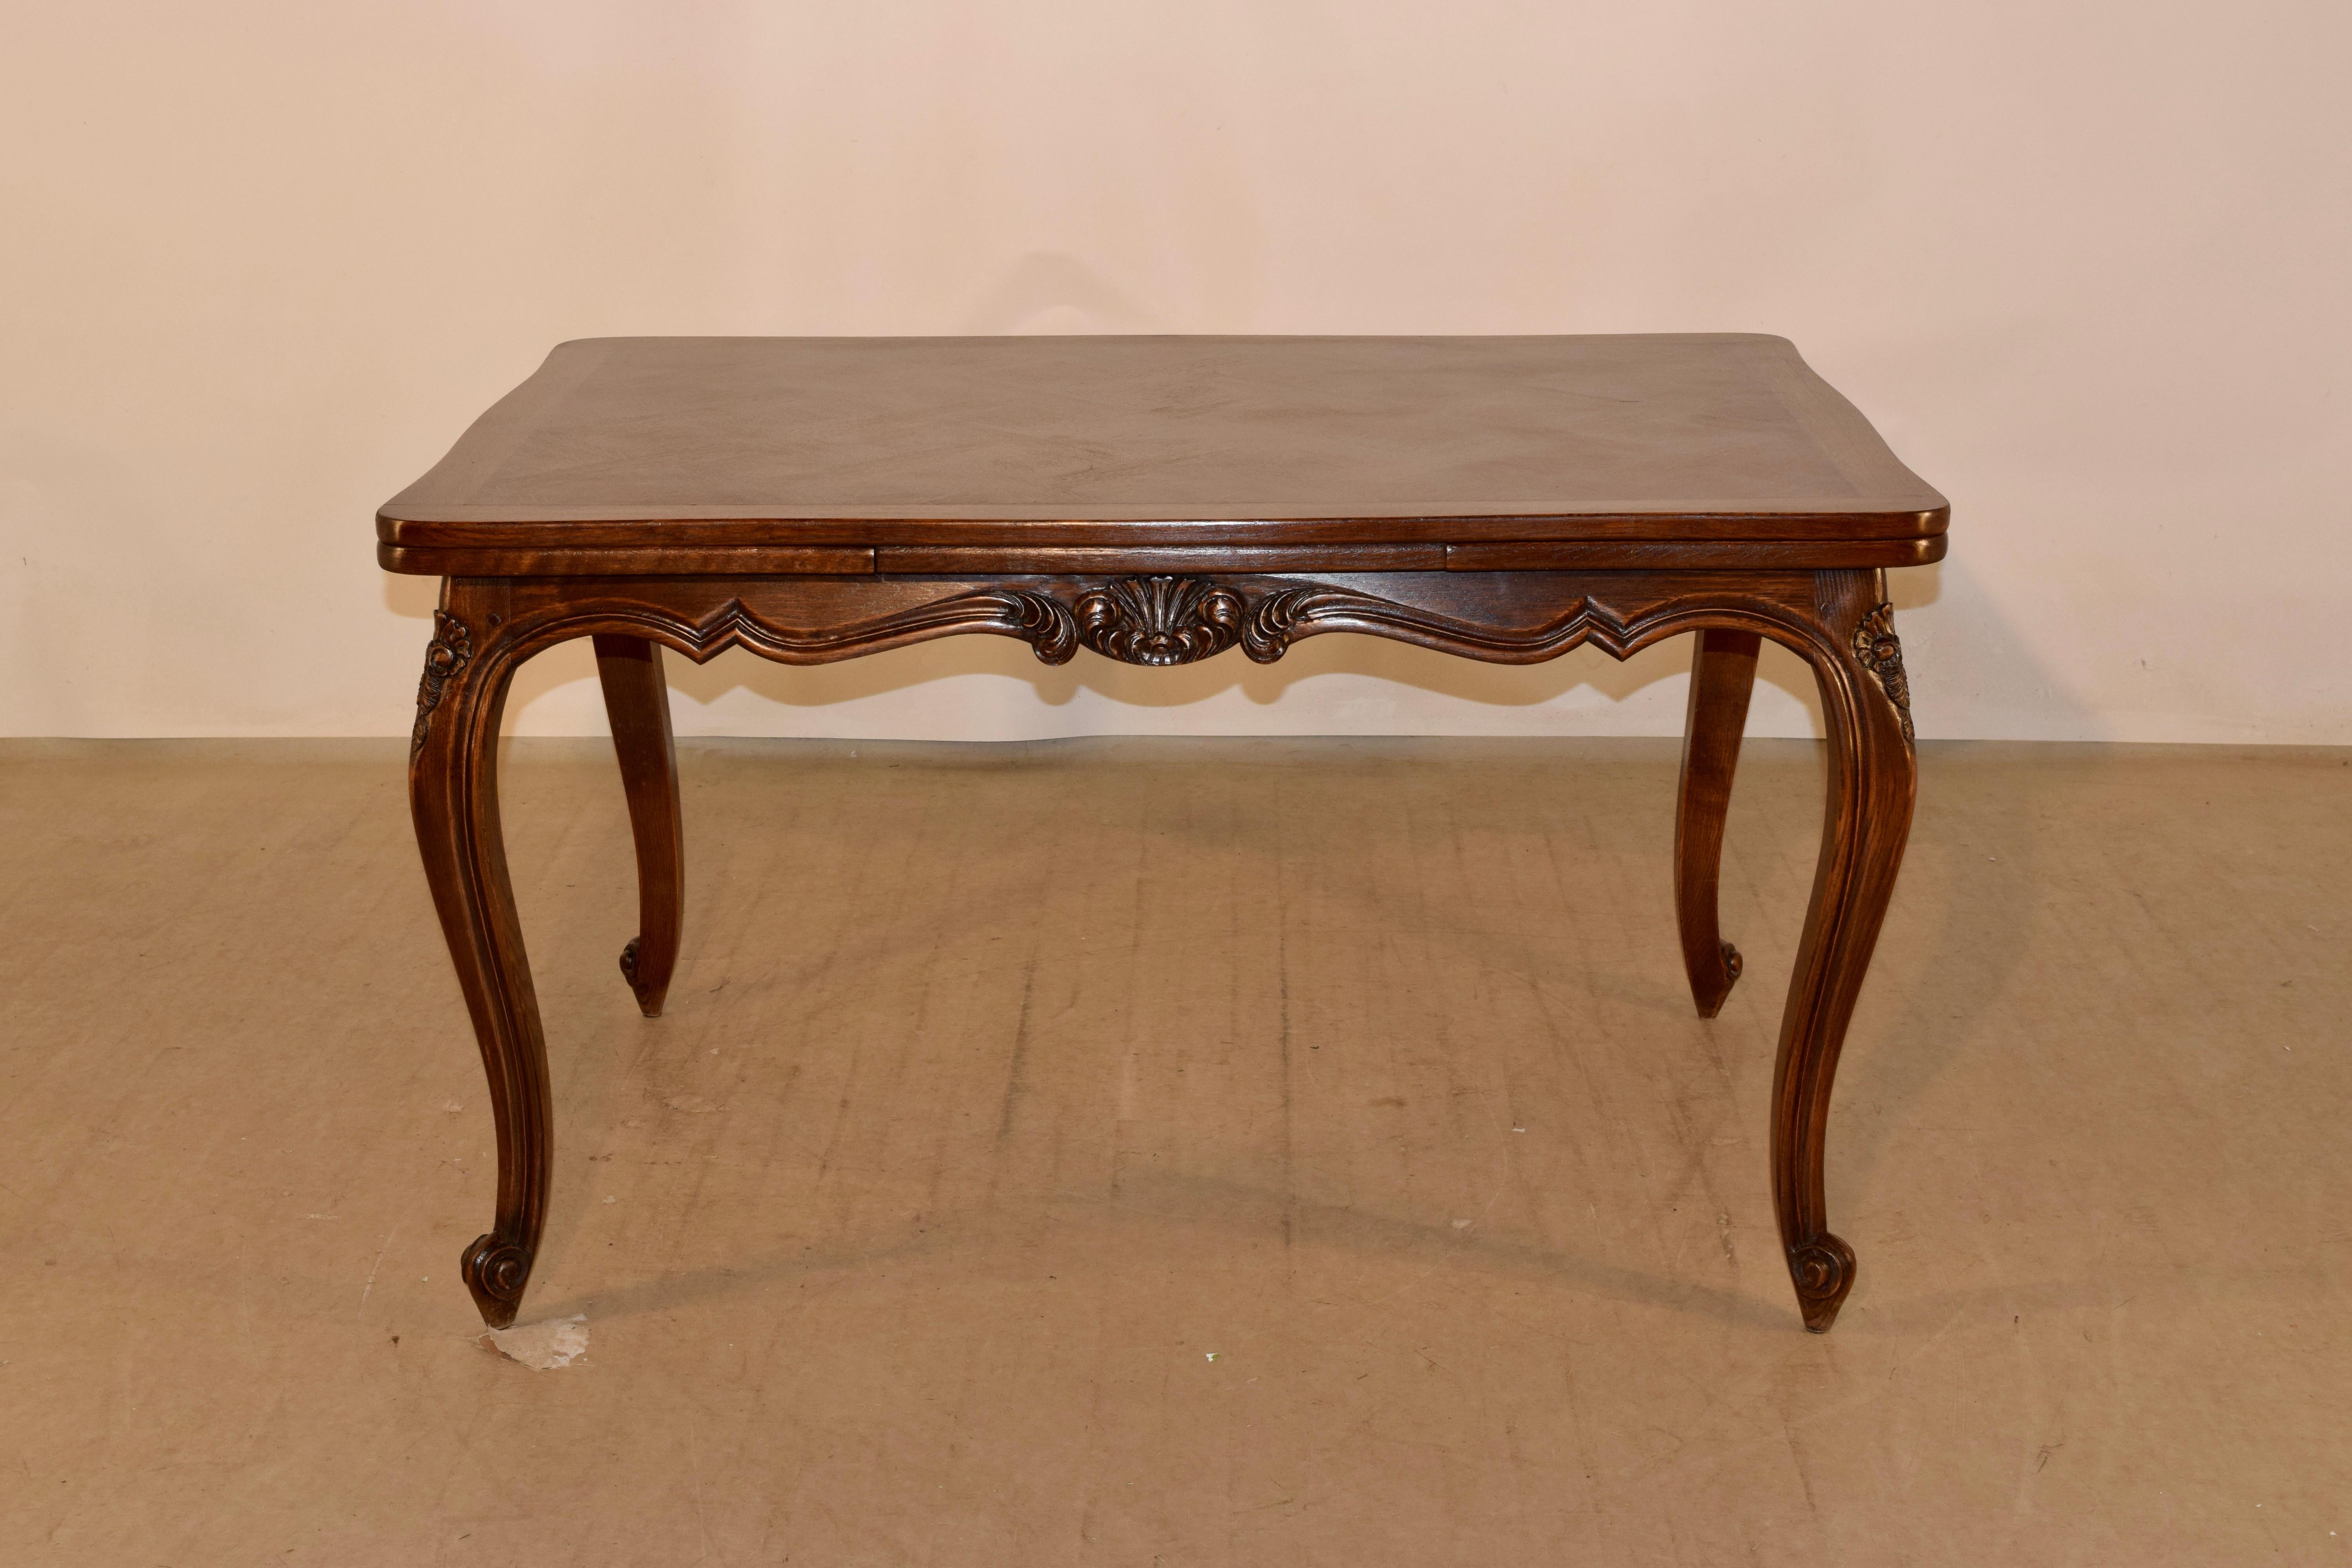 Late 19th century French draw leaf table made from oak with banded and parqueted top and leaves following down to a hand scalloped and carved decorated apron and supported on hand carved cabriole legs with carved shell decorations on the knees and